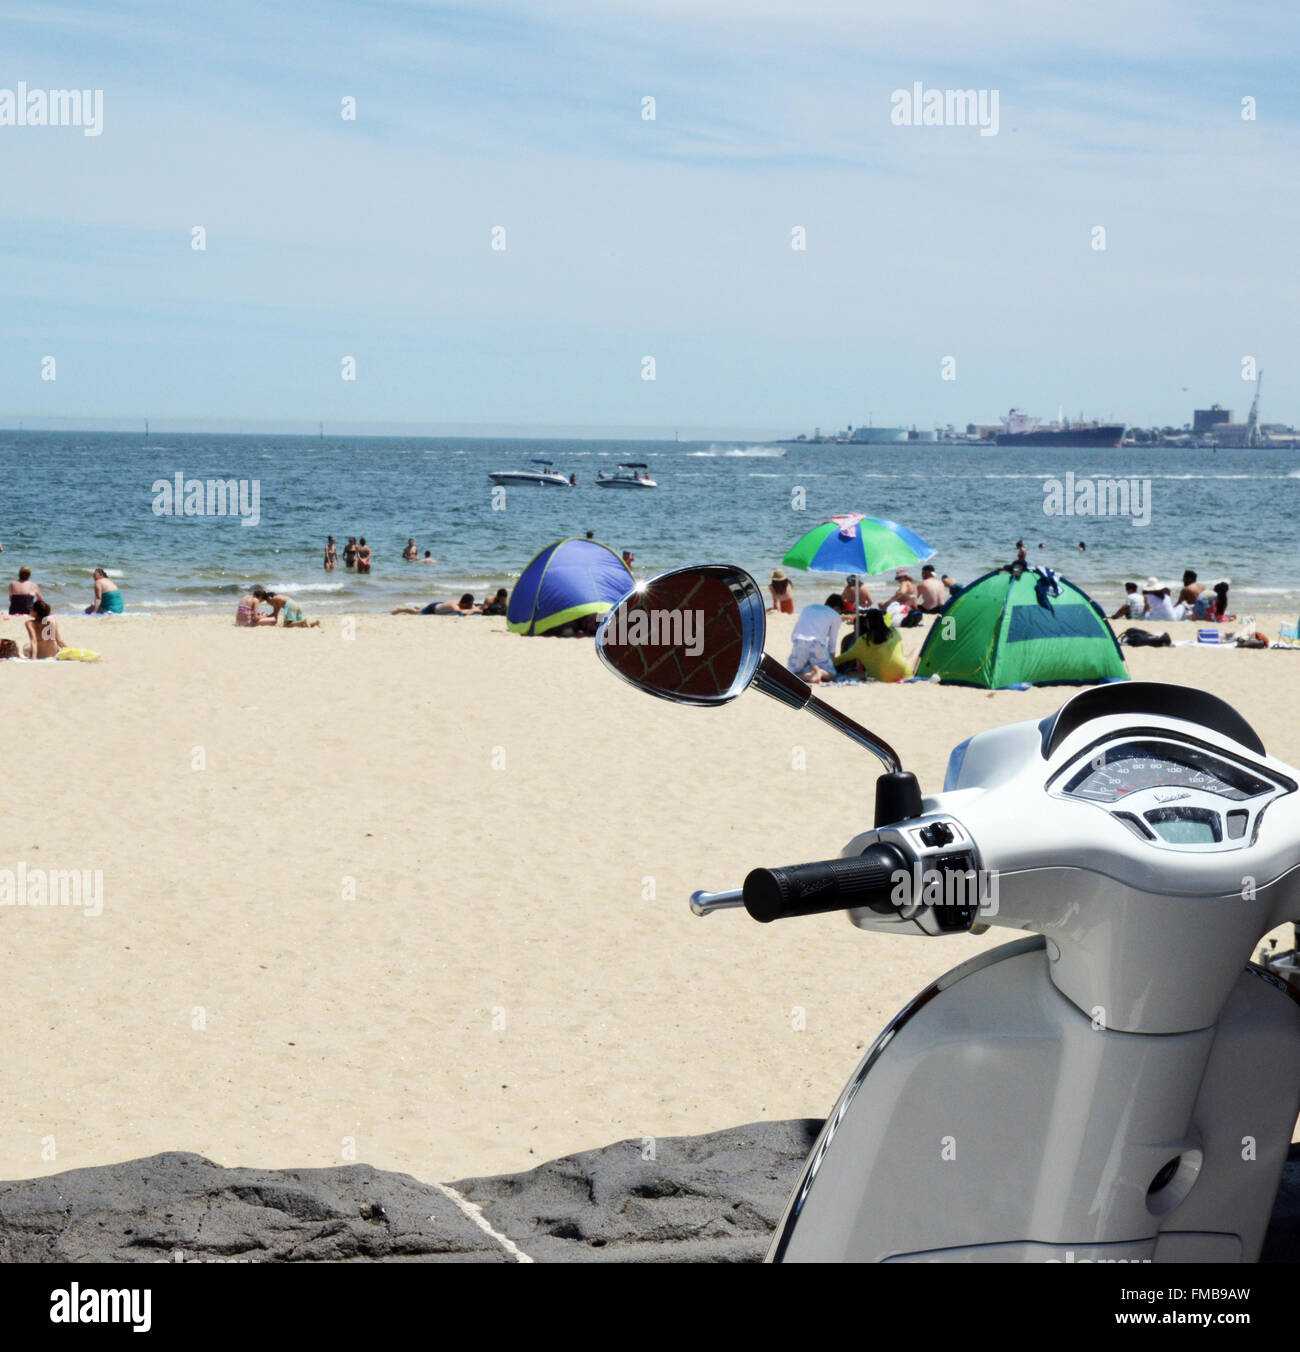 Beach Scene. City Beach with Motorcycle in foreground. Stock Photo